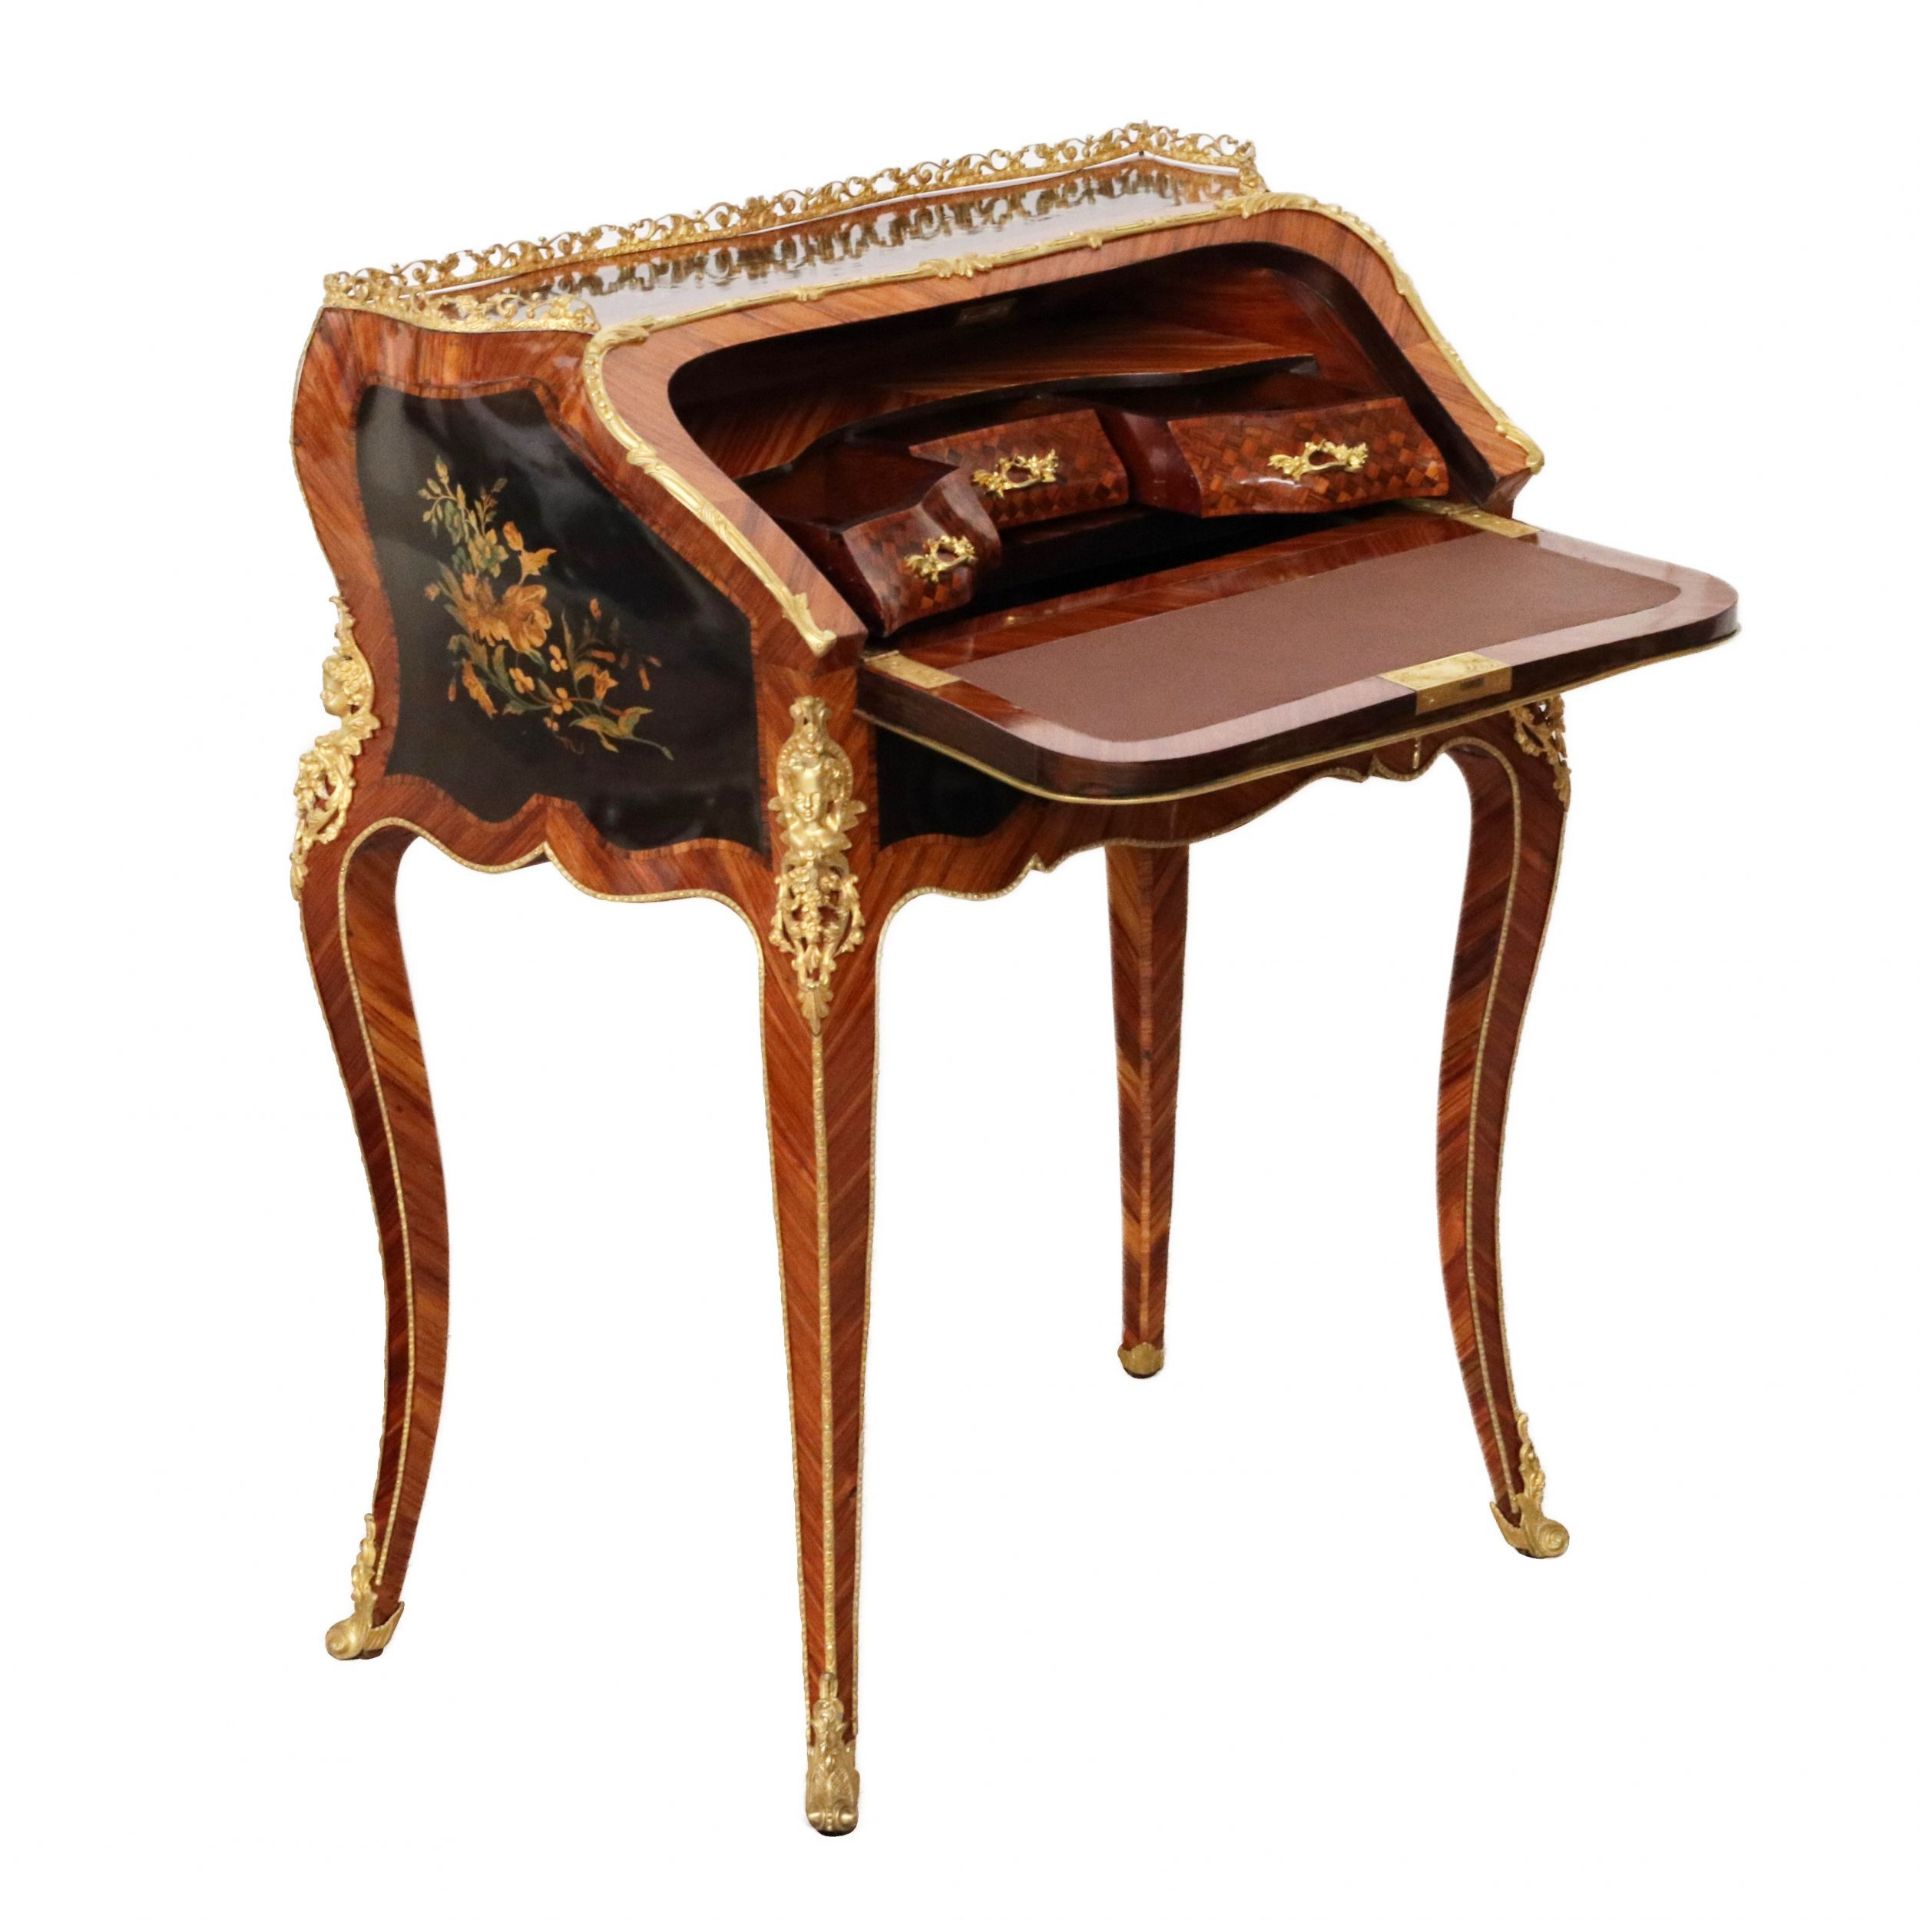 Coquettish ladies` bureau in wood and gilded bronze, Louis XV style. - Image 4 of 11